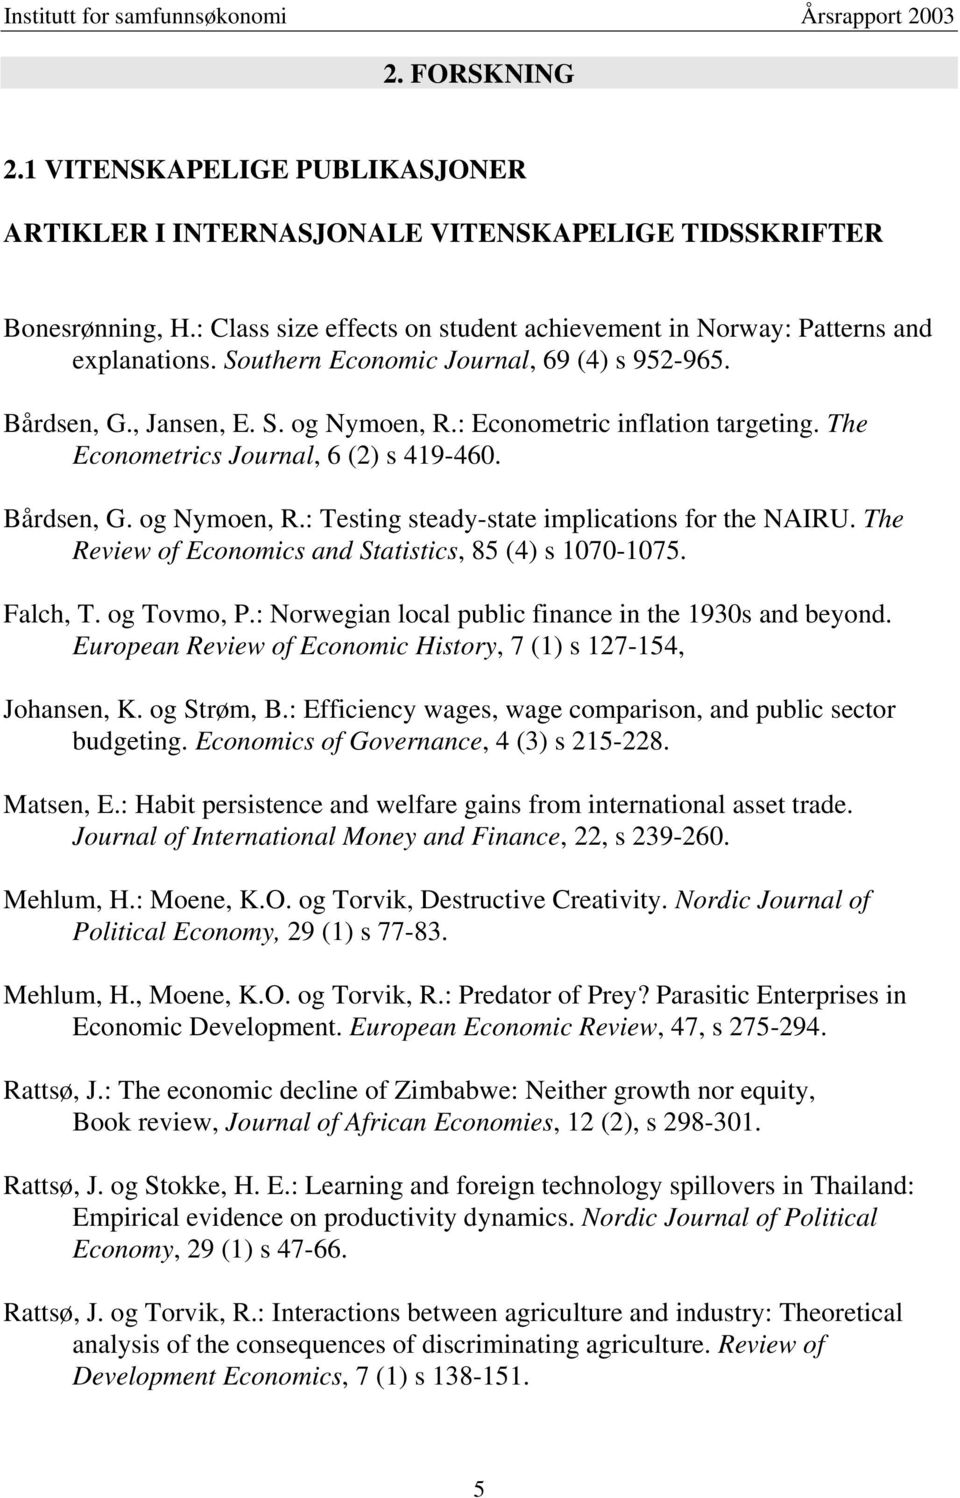 The Review of Economics and Statistics, 85 (4) s 1070-1075. Falch, T. og Tovmo, P.: Norwegian local public finance in the 1930s and beyond.